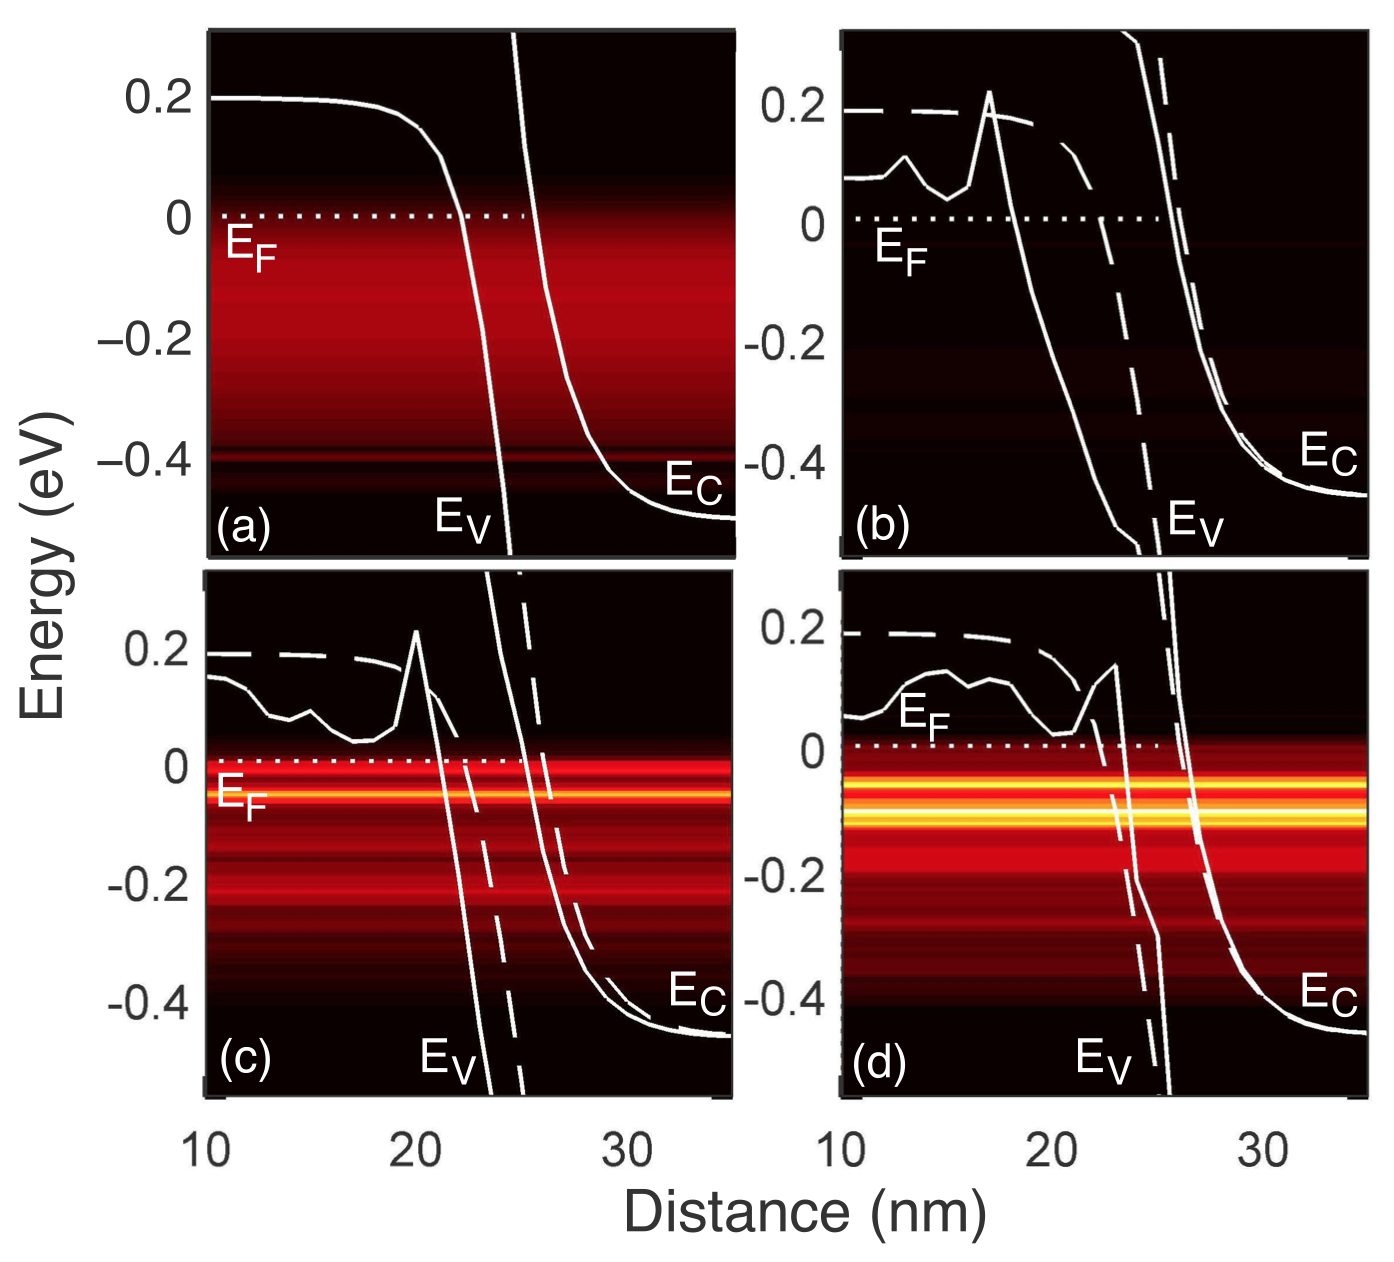 Band diagram at the center of nanowire and energy resolved current density in the ON state for the (a) continuous doping case and three interesting cases in the discrete doped ensemble: (b) minimum current (c) minimum deviation from continuum case and (d) maximum current. Darker colors represent lower values of current. Ec, Ev, EF: the conduction, valence, and Fermi energies, respectively. In (b), (c) and (d), band lines from continuous doping model are shown in dashed white lines for comparison.